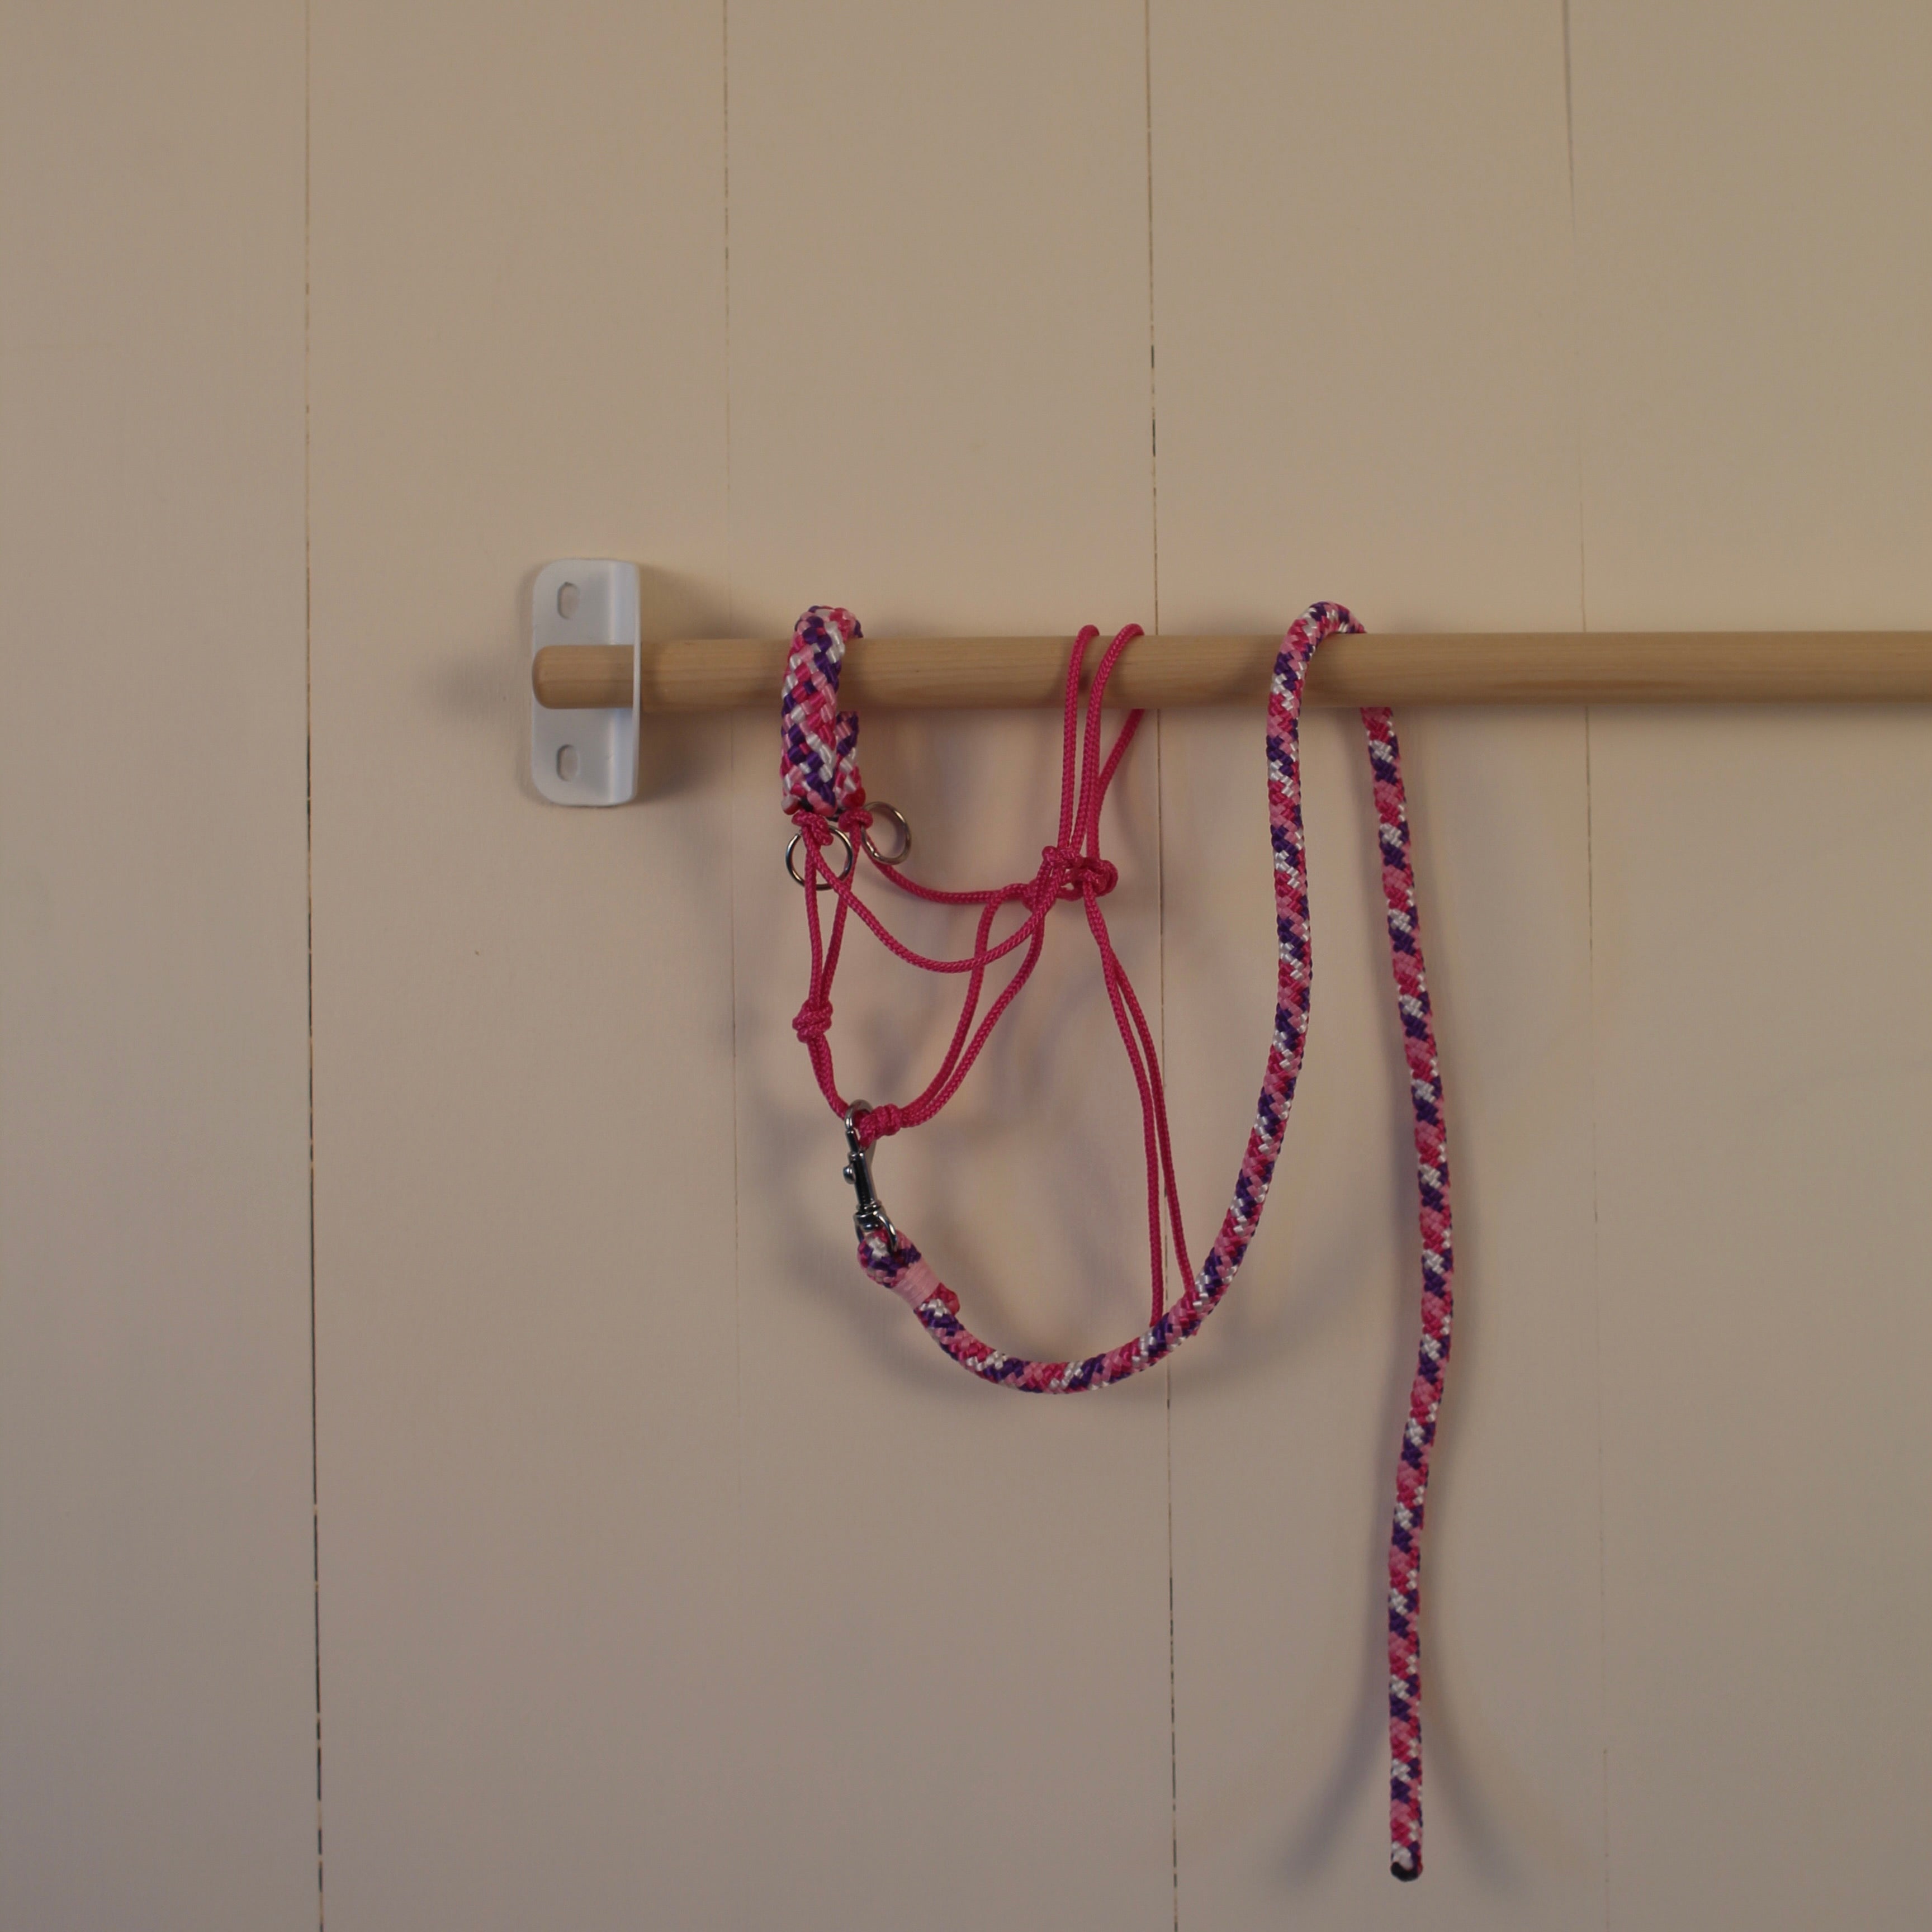 Halter with rope pink / purple / white